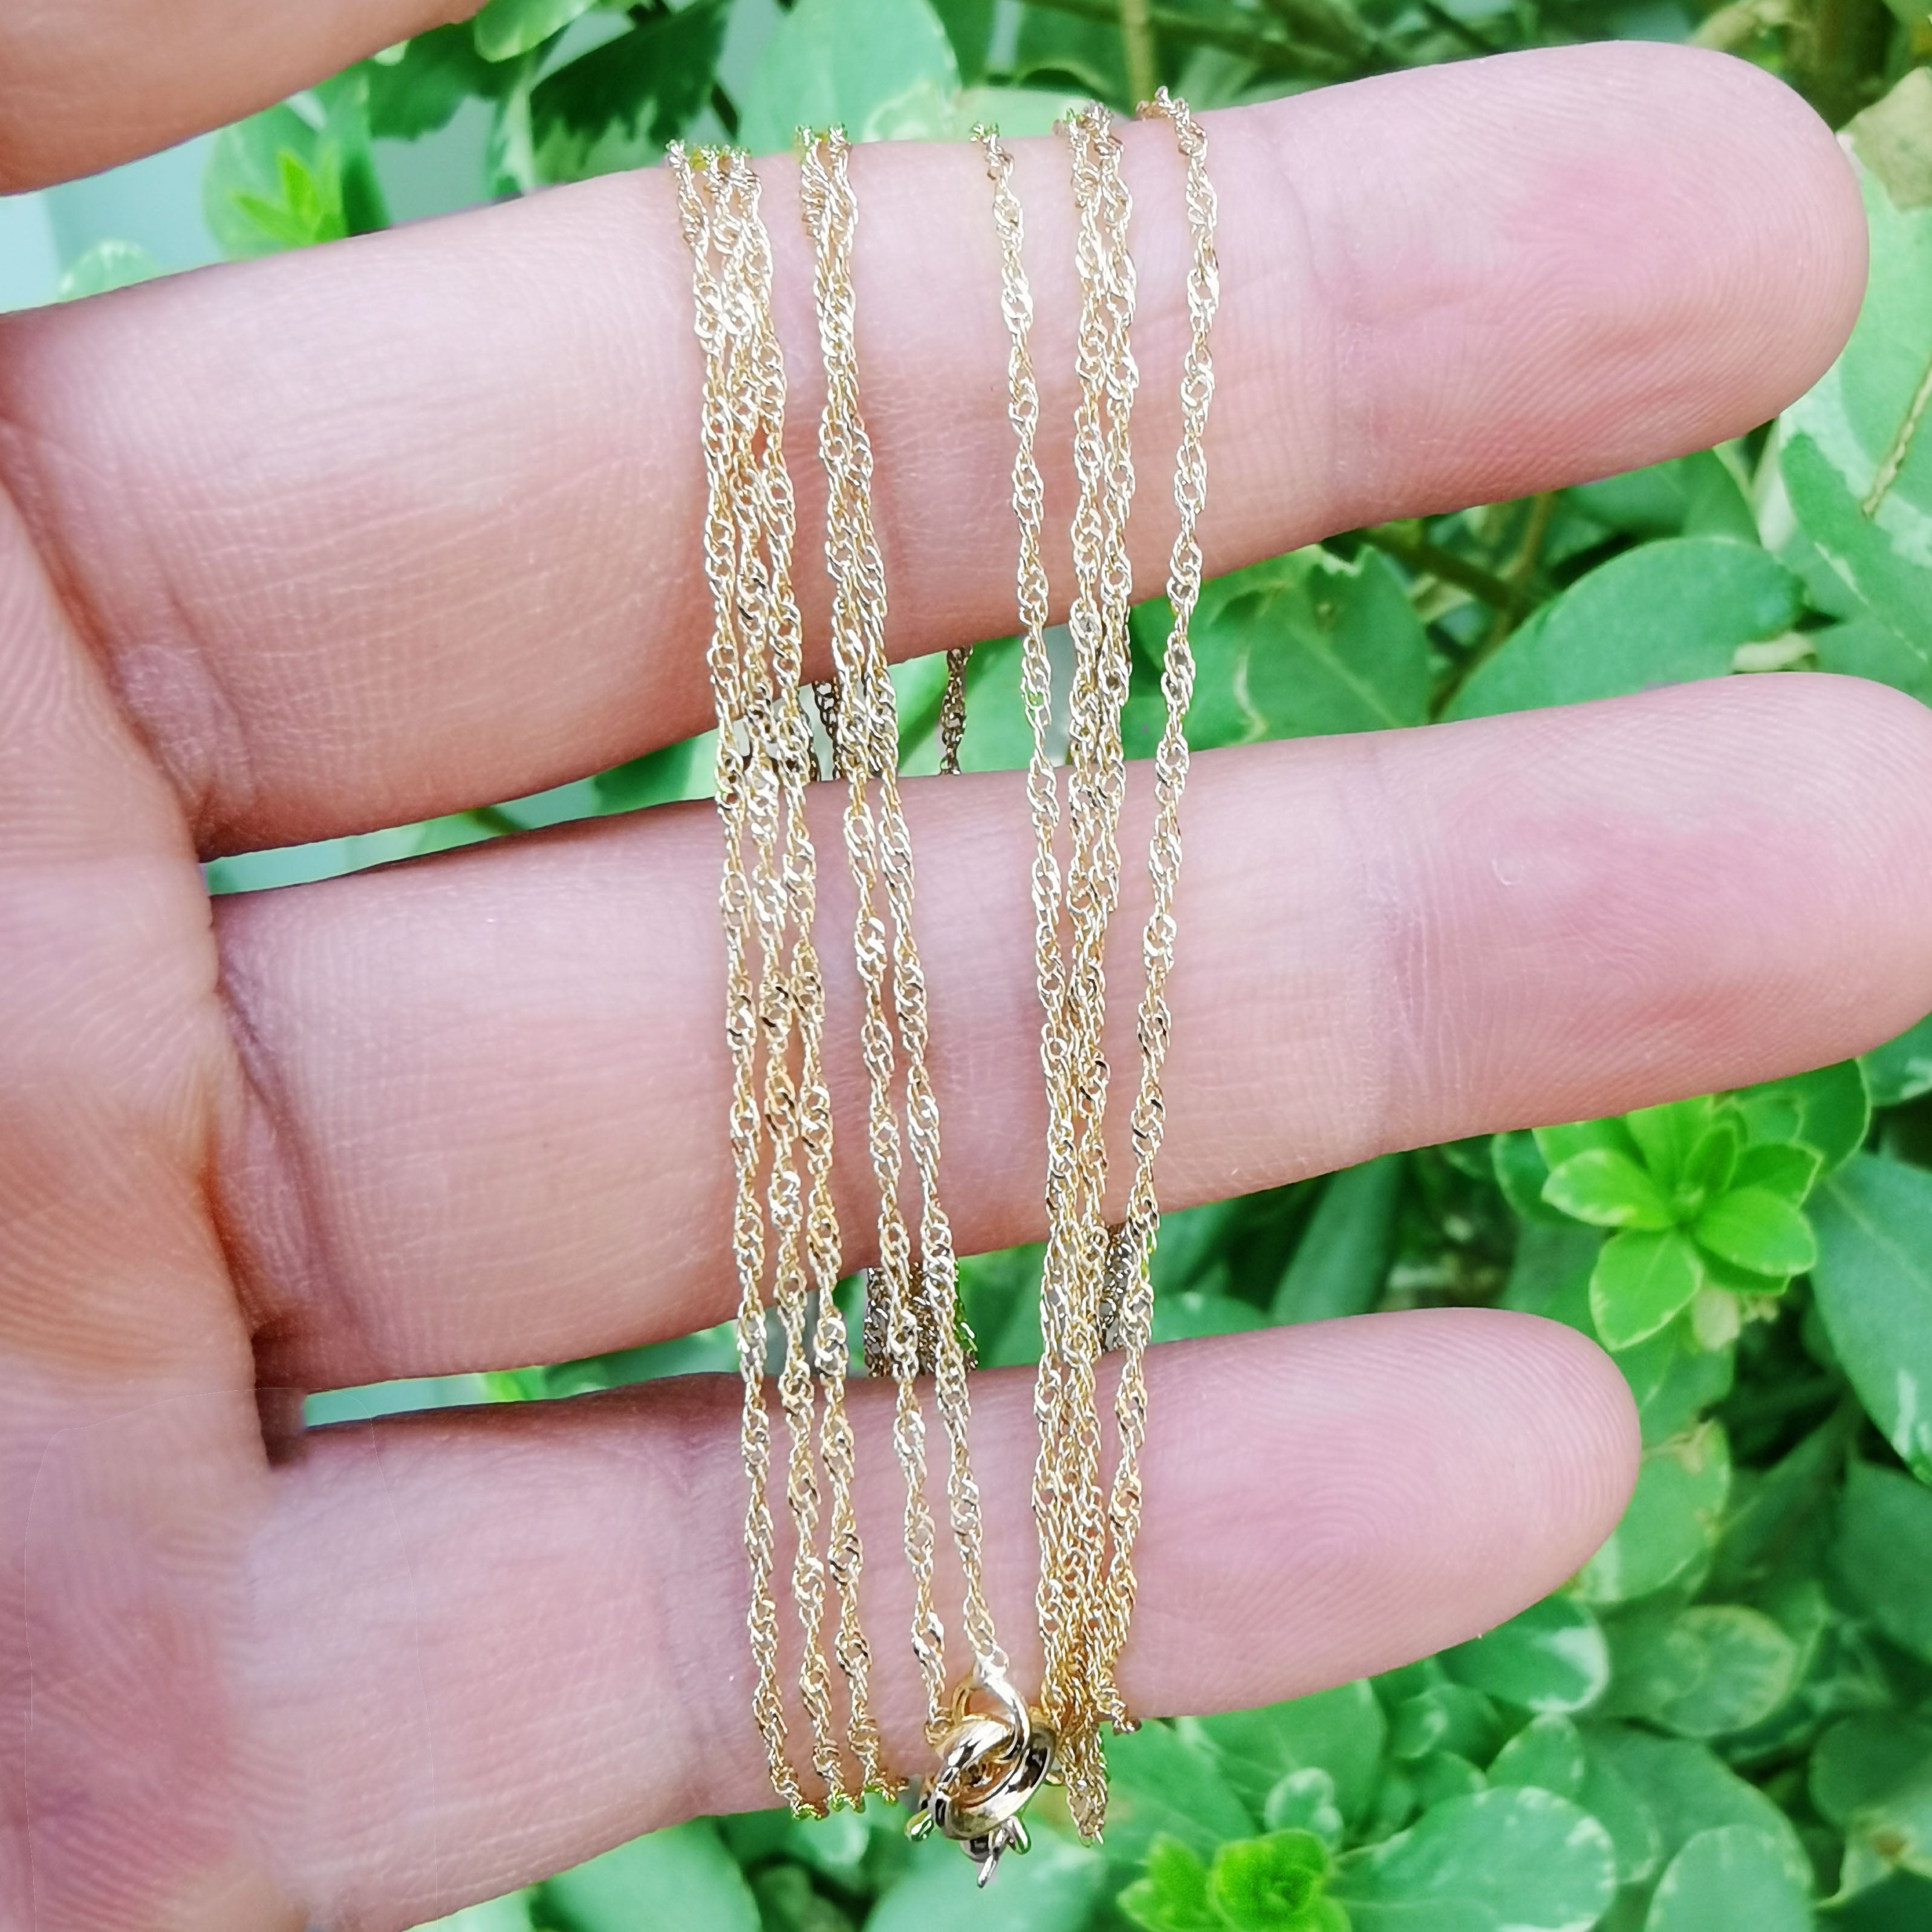 Dainty Singapore Chain Gold Twist Chain Necklace -Finished Twist Link Chain Layering Necklace 1.2mm 17.5 inch ready to wear with Charm, 14K Gold Filled Singapore | WA-774 - DLUXCA